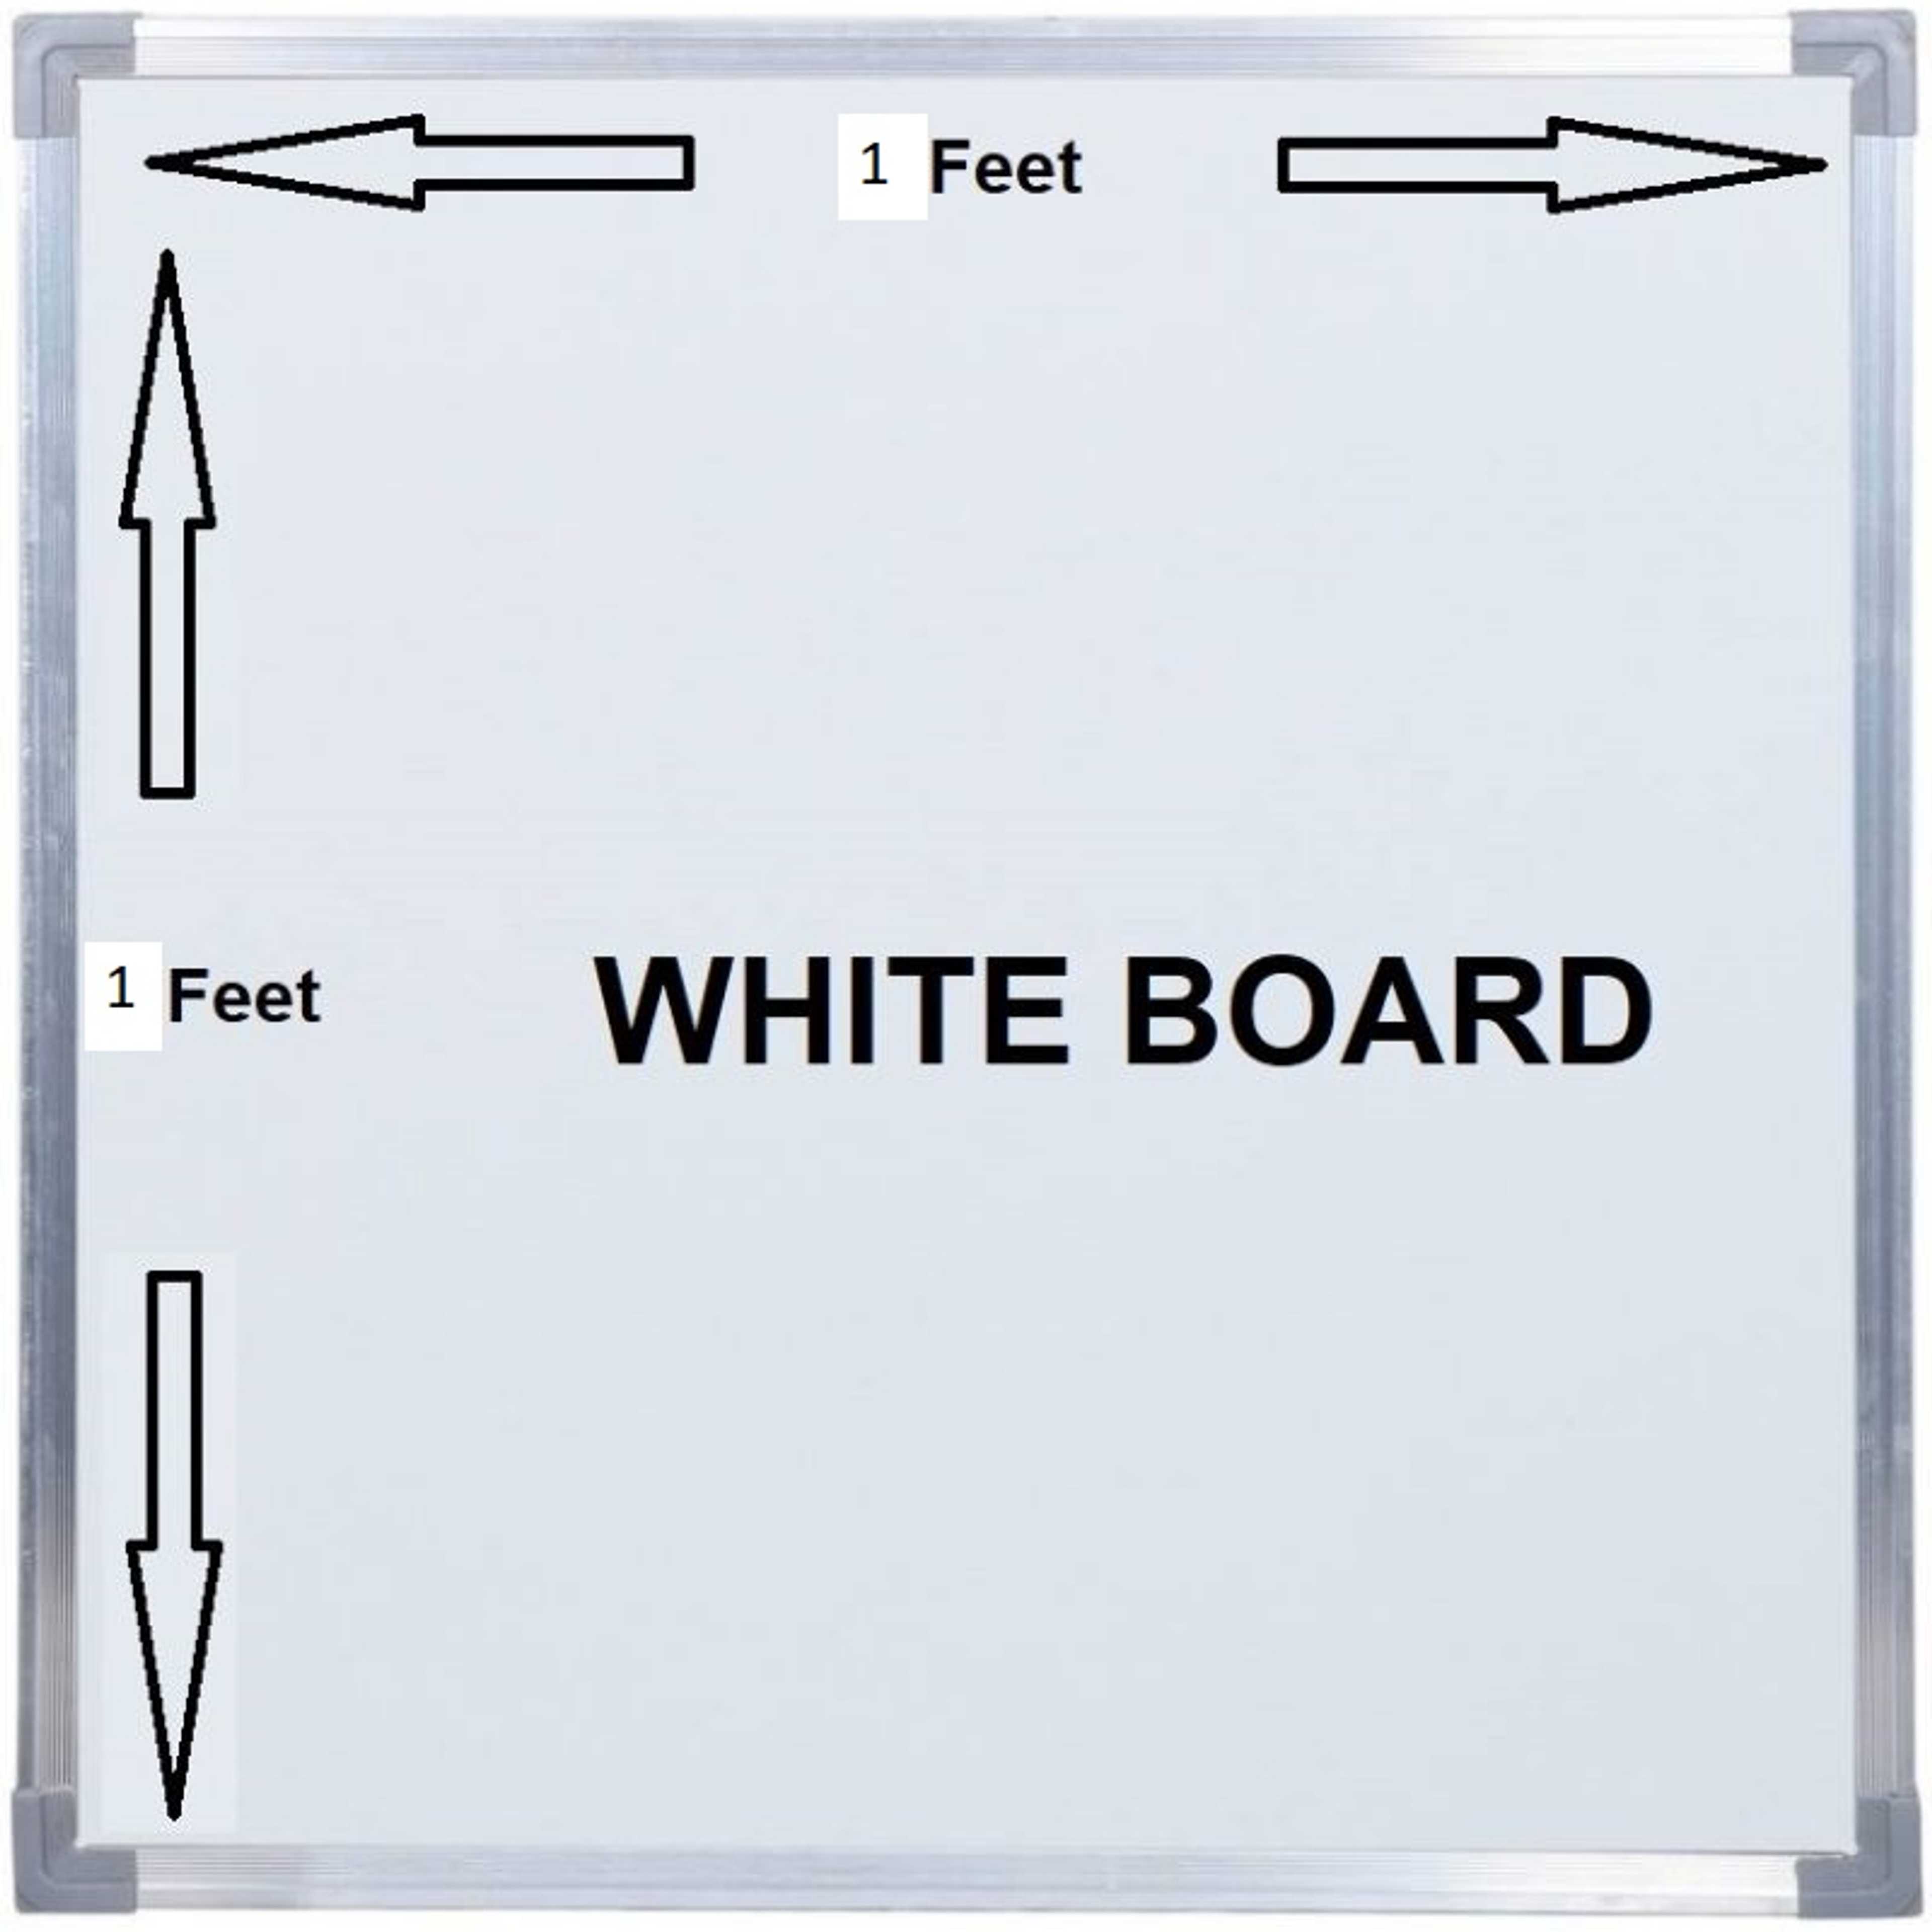 1ft x 1ft Dry Erase White Board Hanging Writing Drawing & Planning Whiteboard